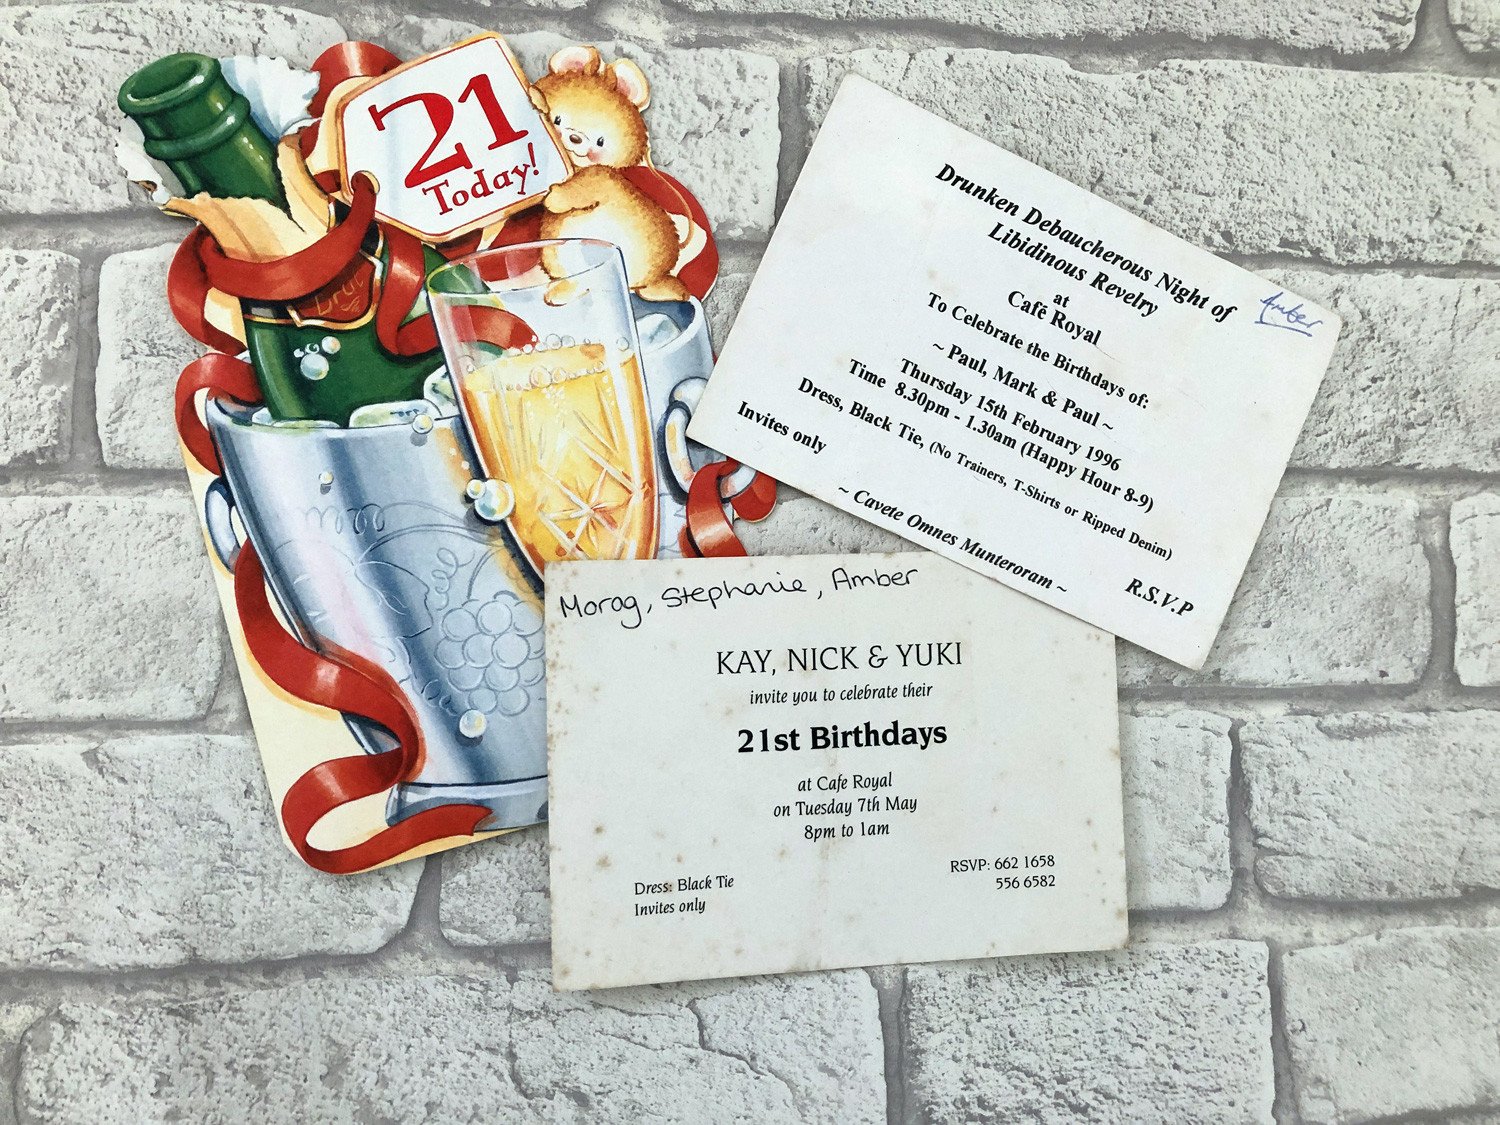 21st birthday card and invitations